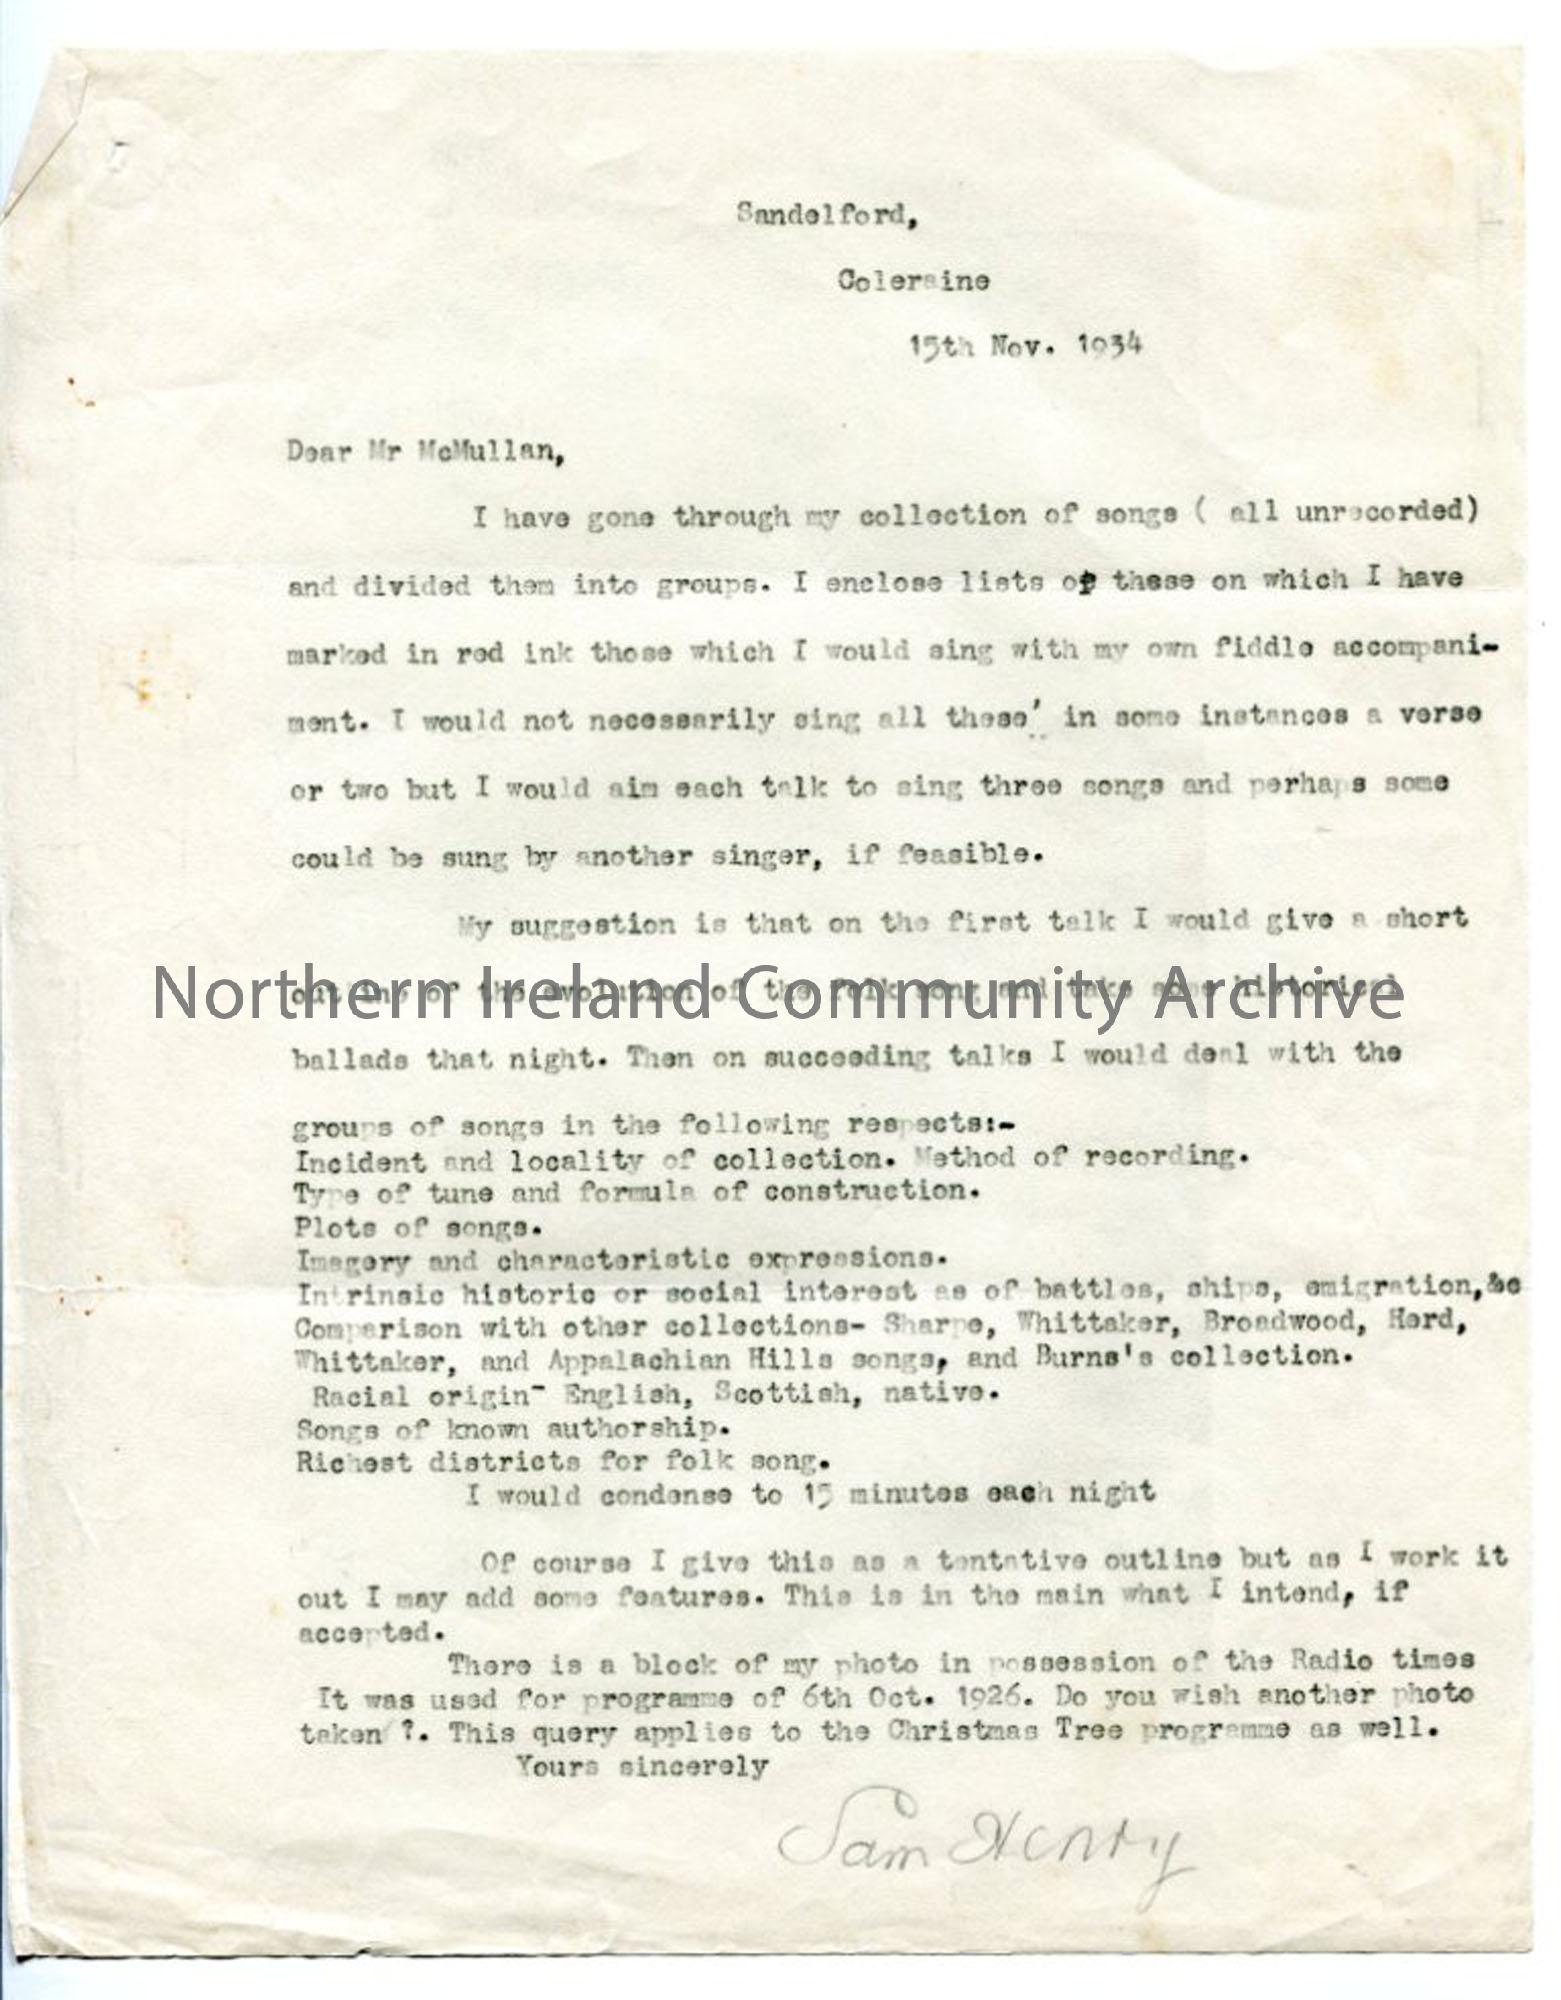 Letter to Mr McMullan of the BBC, dated 15.11.1934